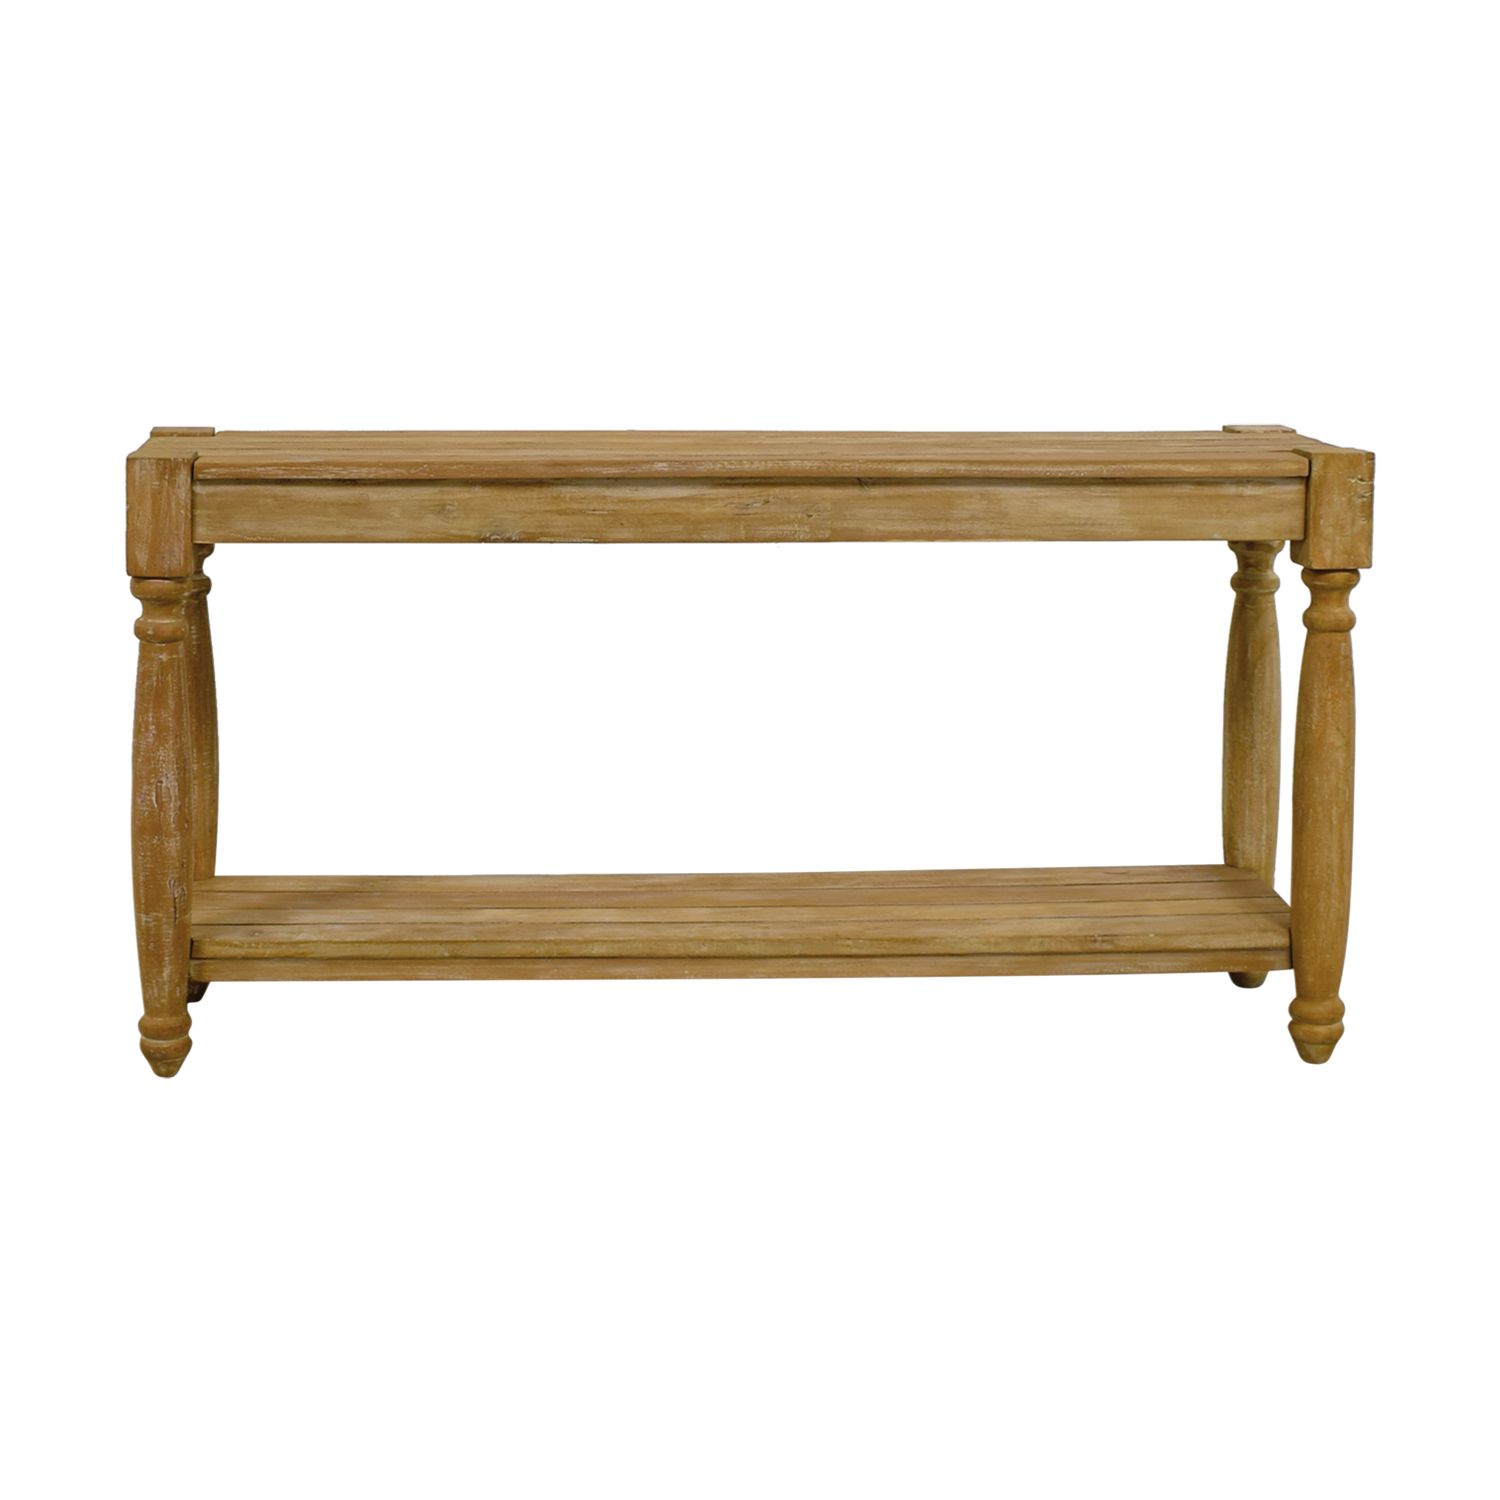 77% Off – Homegoods Homegoods Natural Wood Console Table / Tables Regarding Natural Wood Console Tables (Gallery 20 of 20)